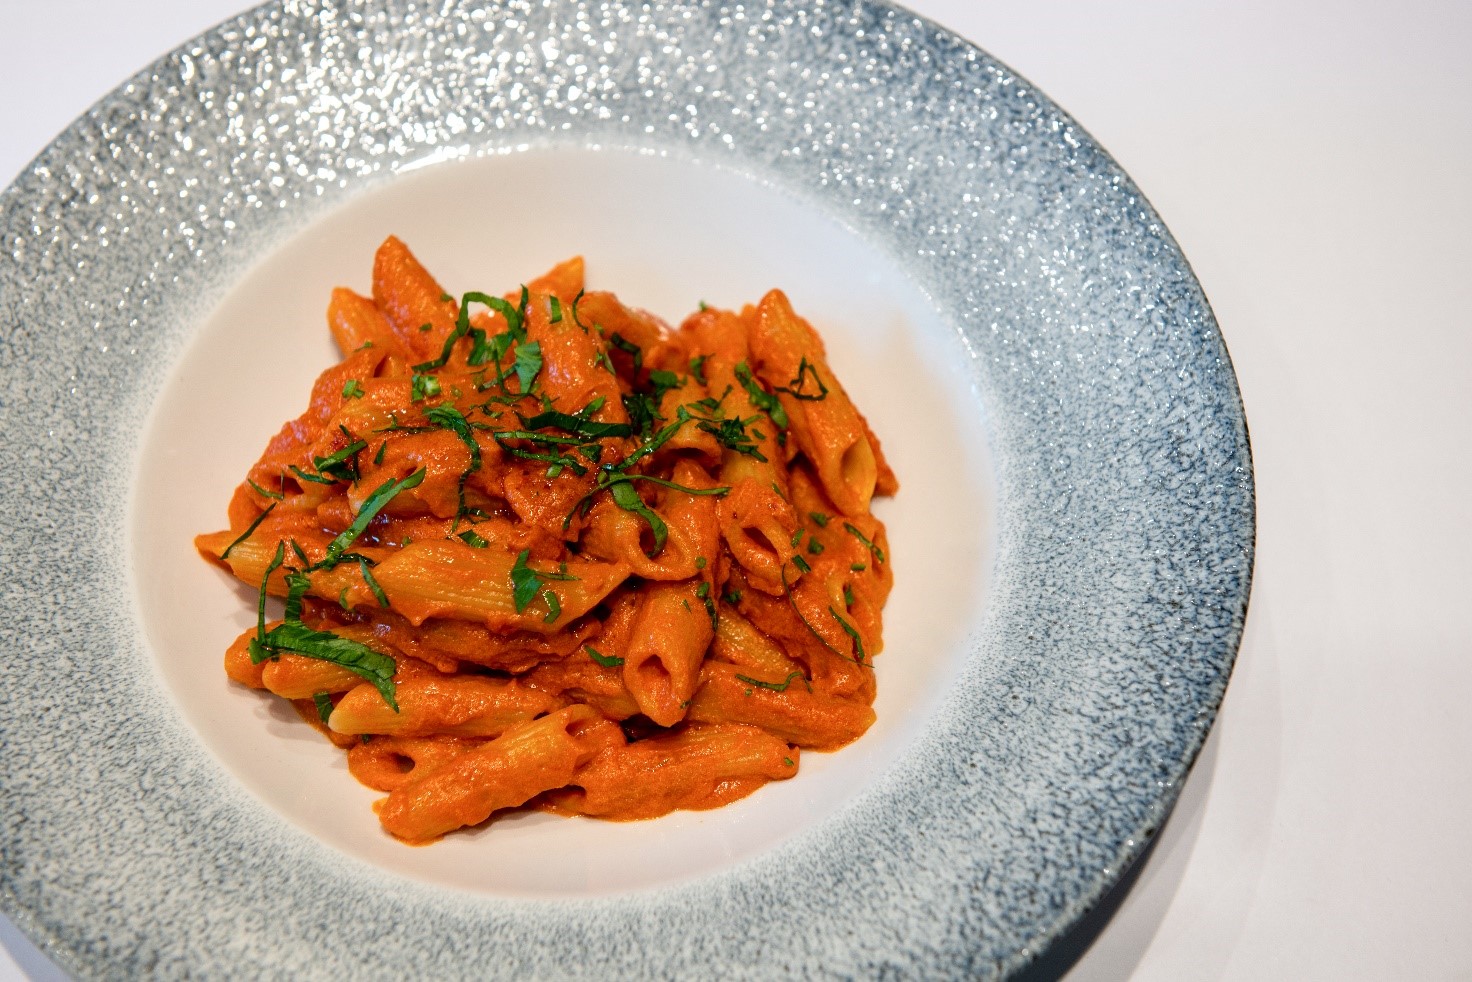 Pennette with vodka sauce